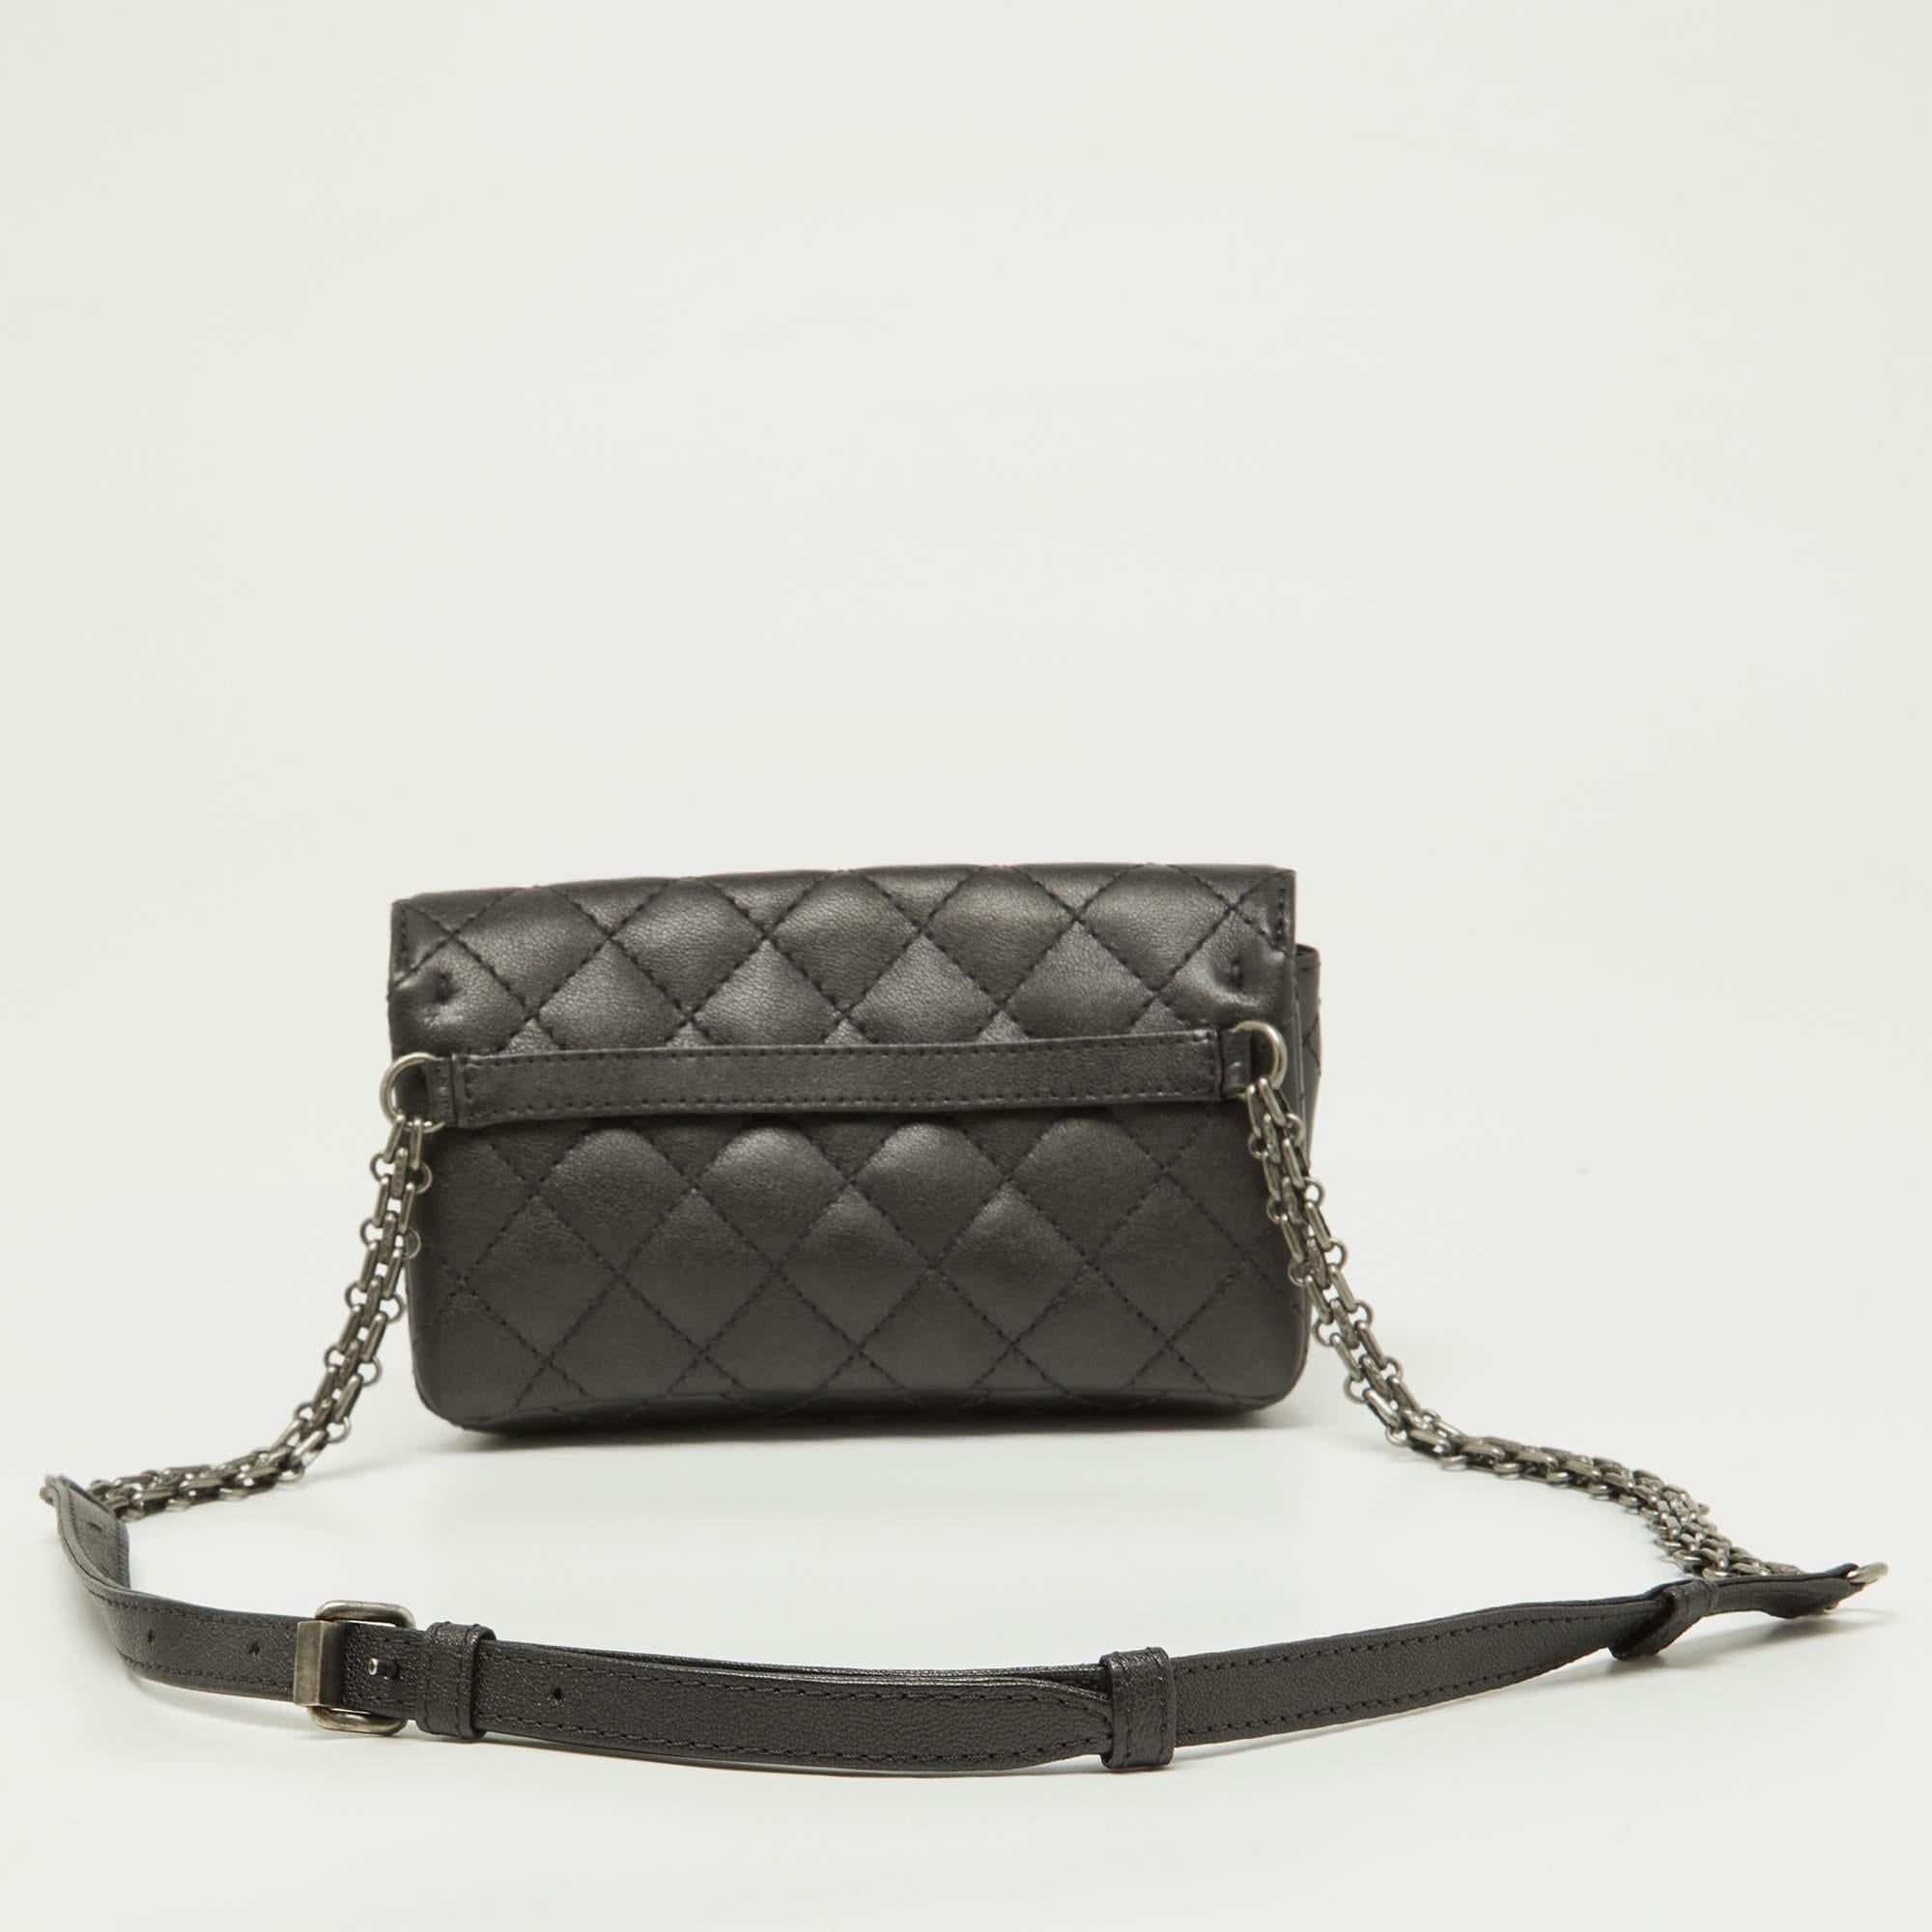 For days when you need just essentials, carry this cutesy Reissue 2.55 belt bag. It has been expertly crafted from durable quilted leather in the iconic silhouette. It comes with the Mademoiselle lock on the front flap, an interwoven chain belt, and